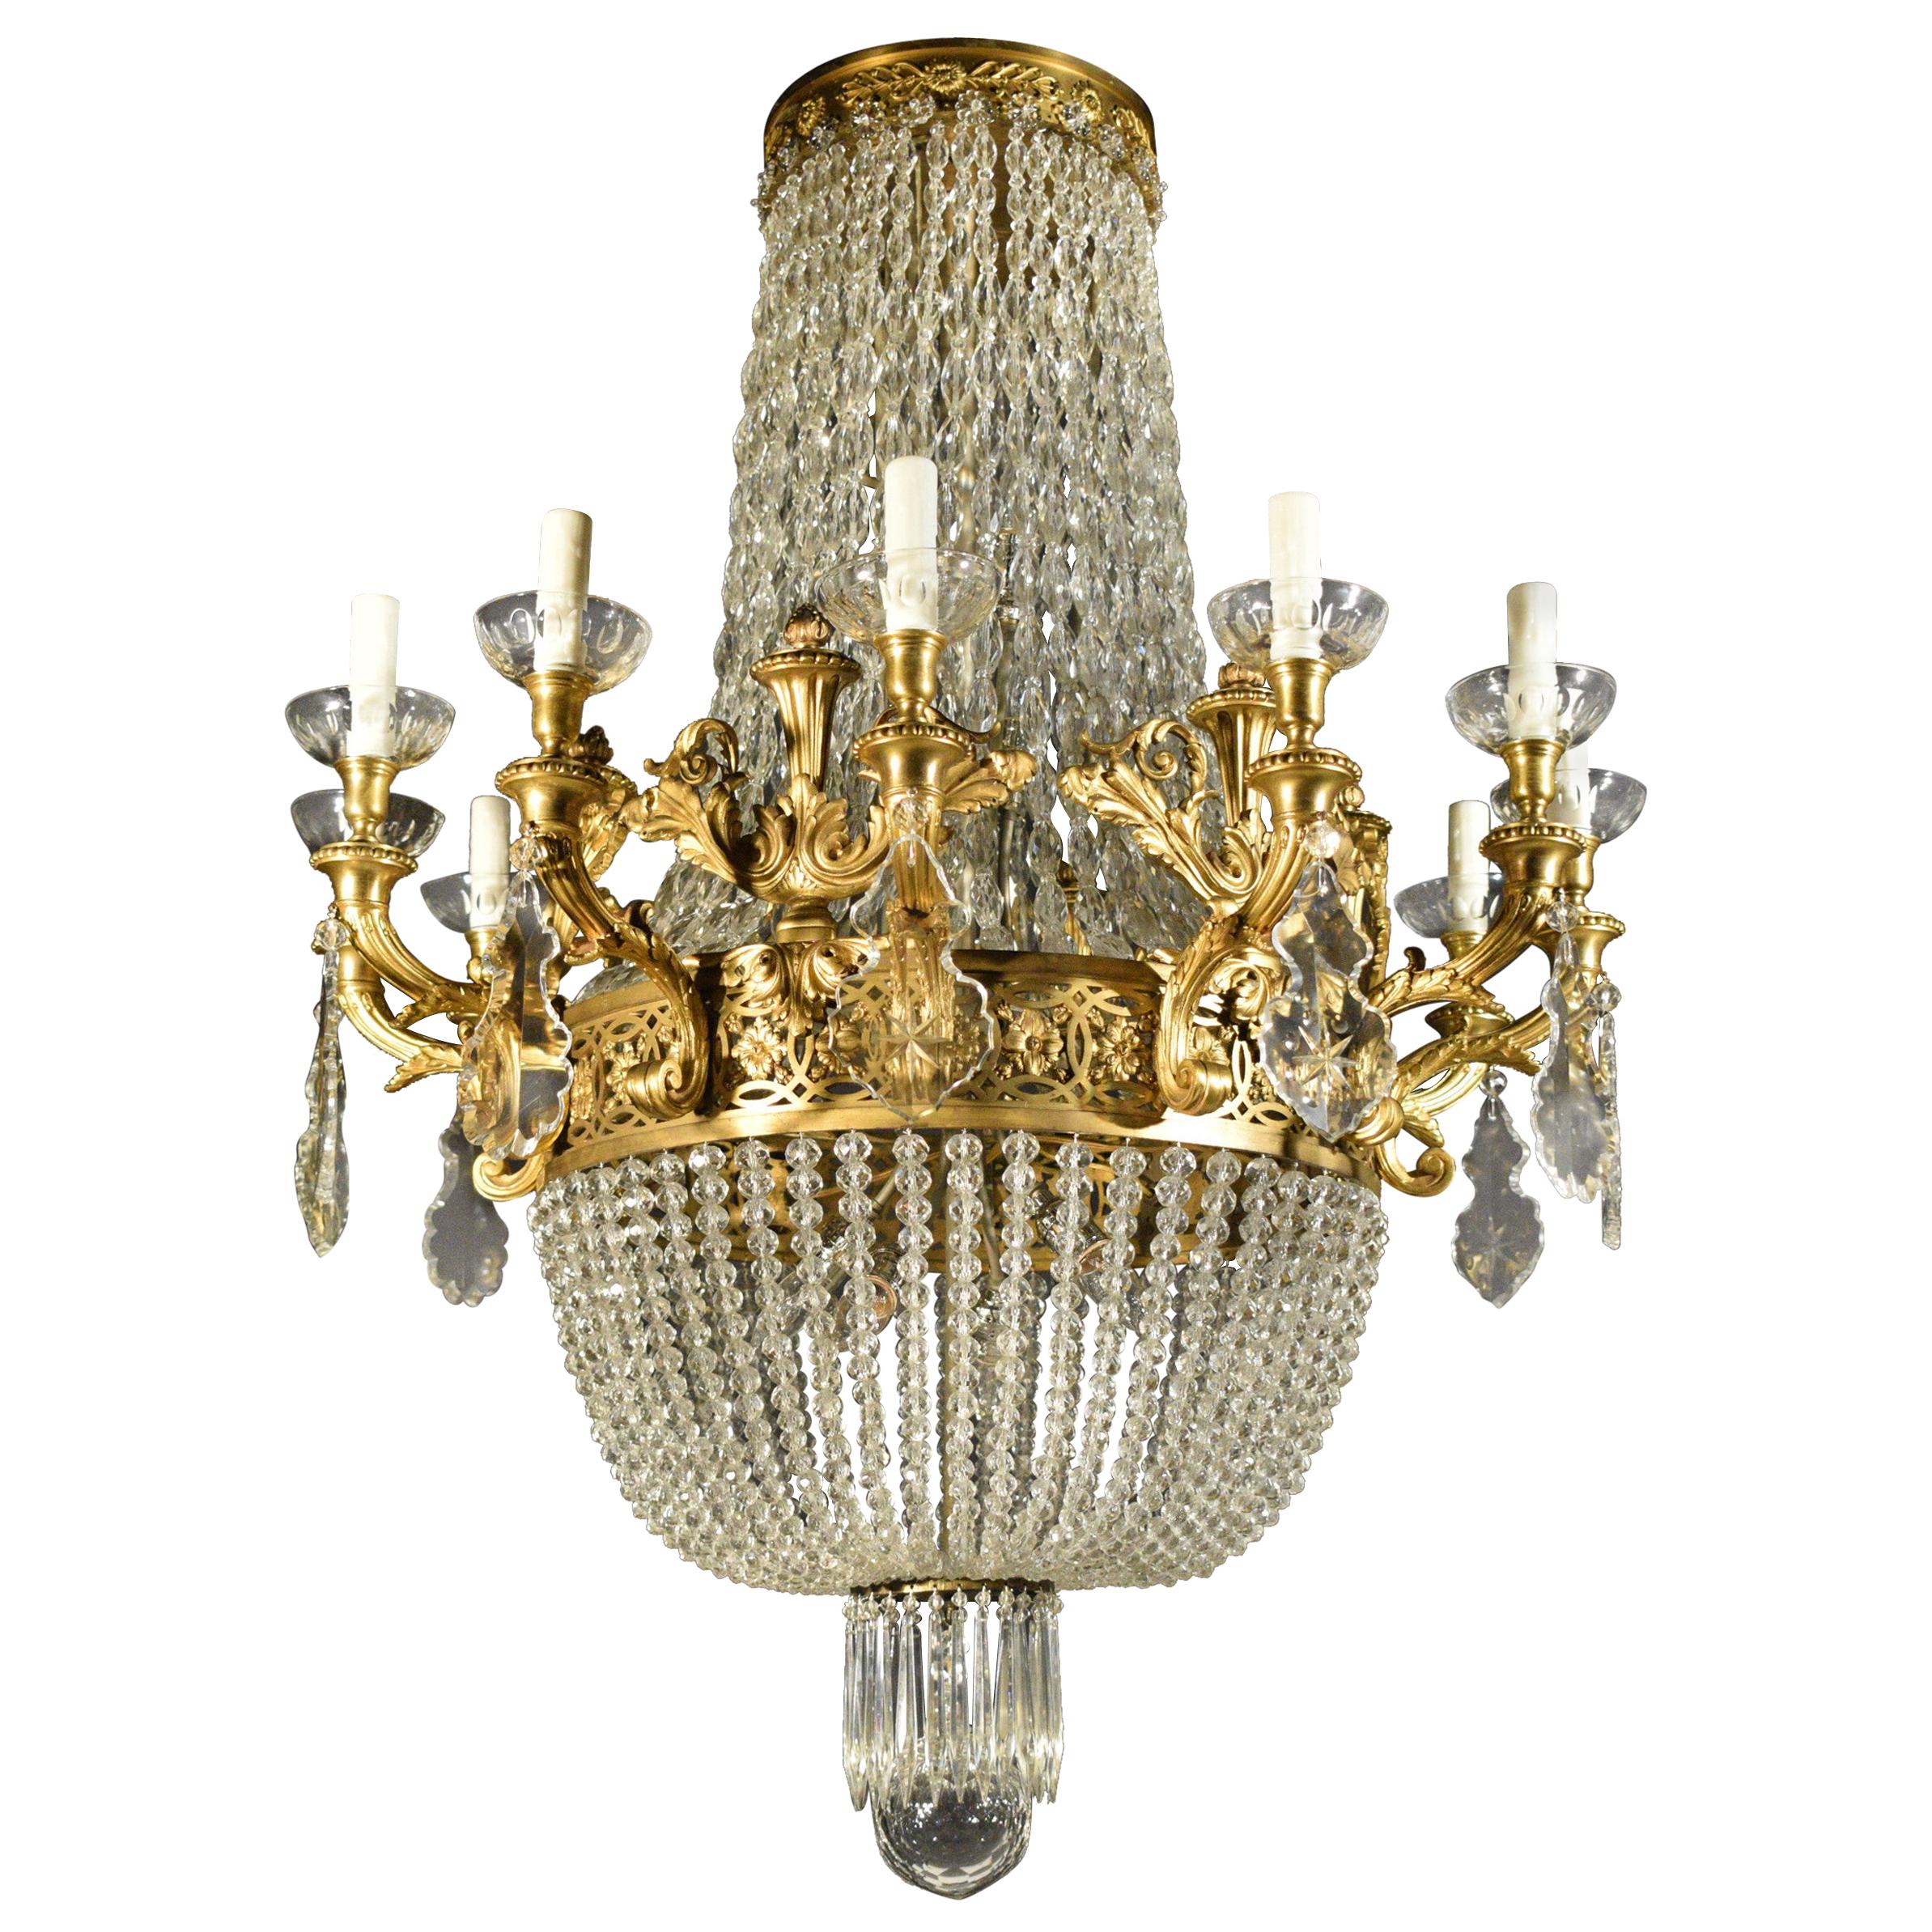 Exquisite Gilt Bronze and Crystal Chandelier For Sale